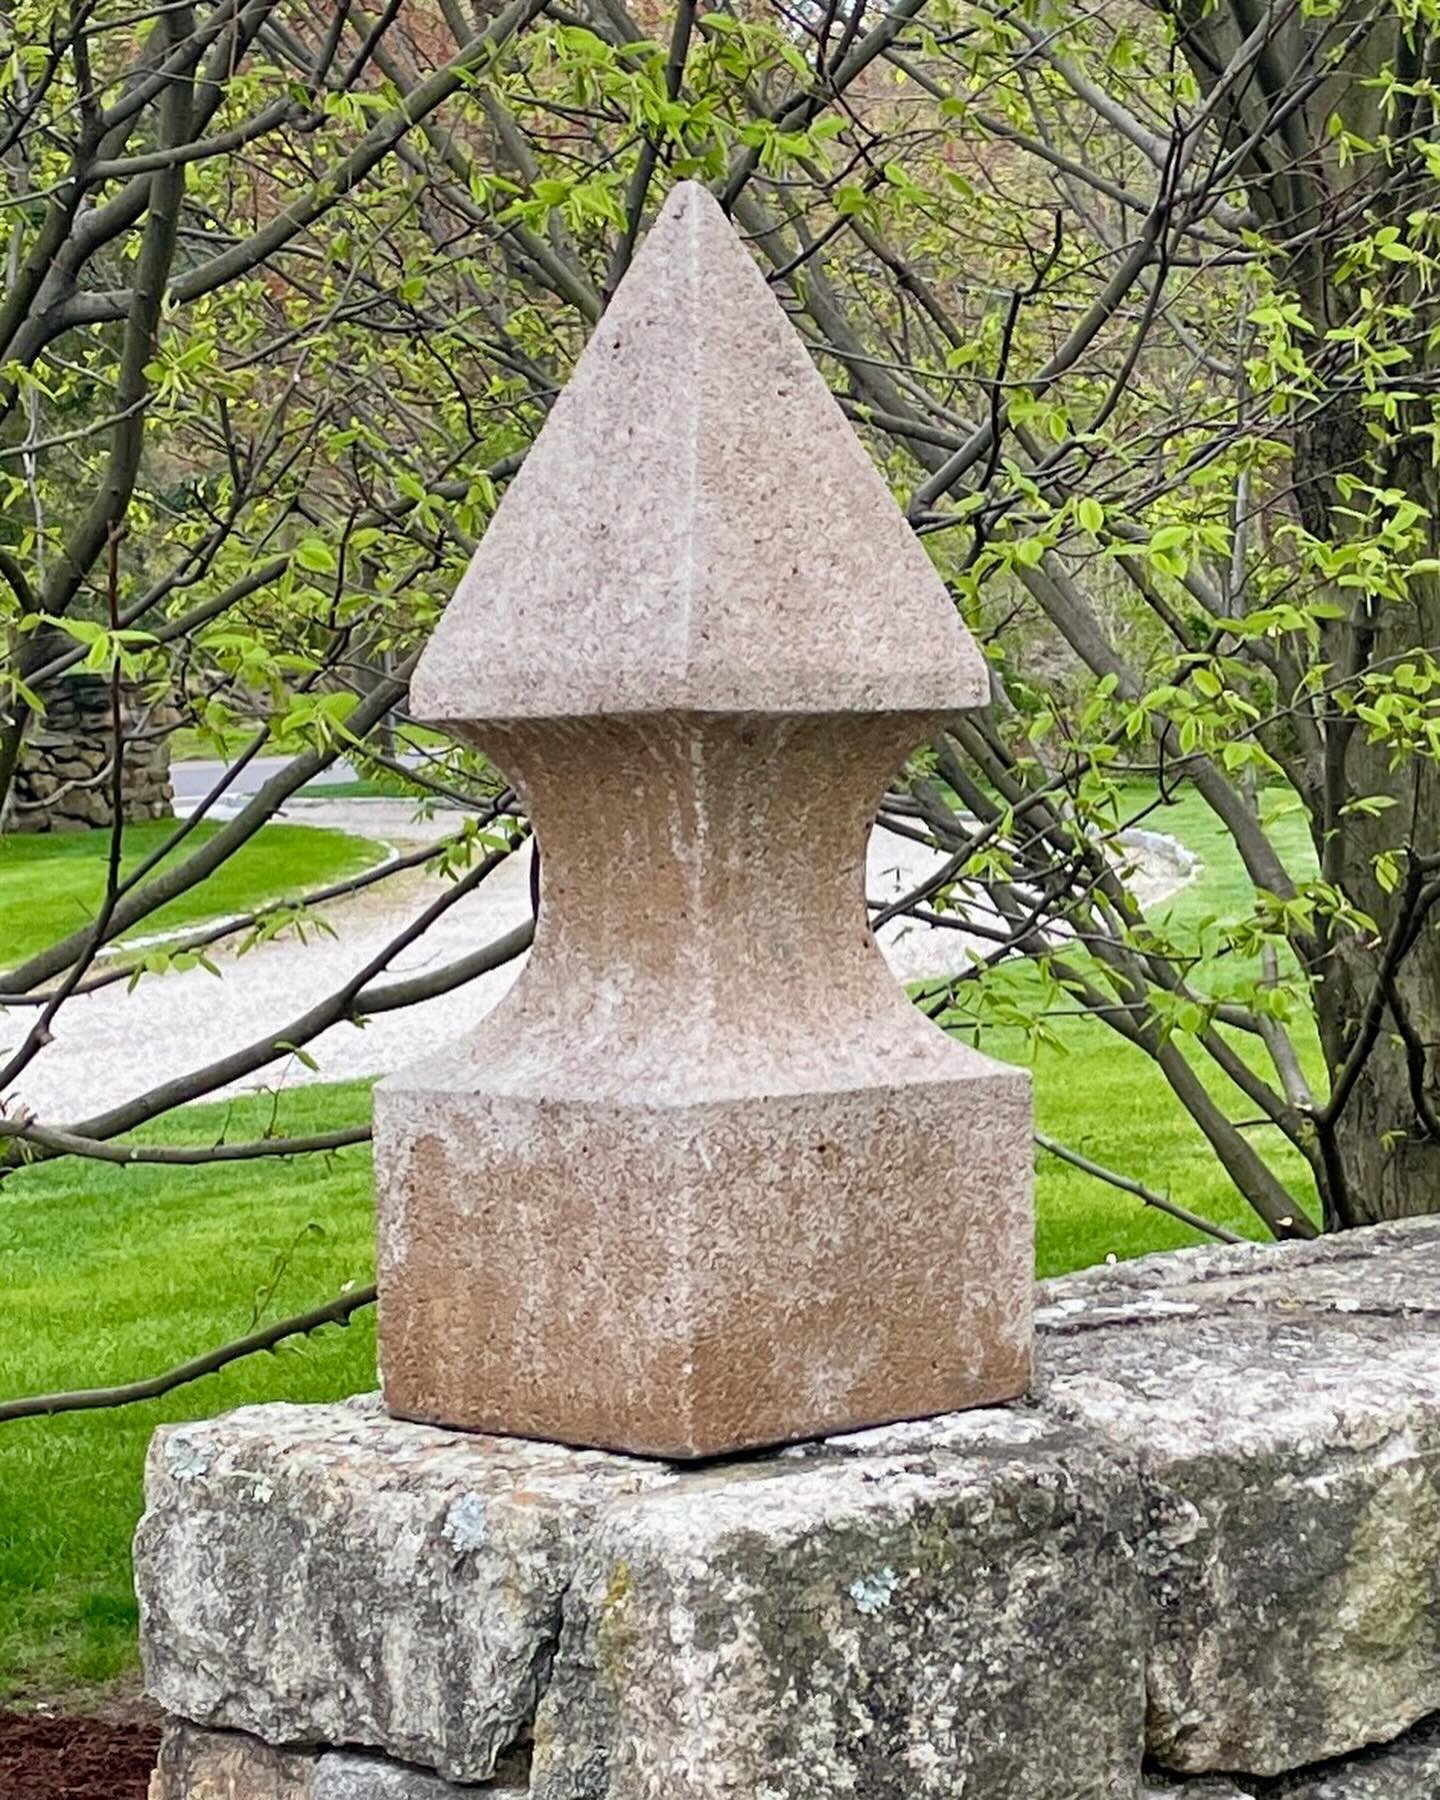 We were thrilled to find a pair of garden ornaments in the classical shape of an obelisk. A striking addition to the garden - perfect atop gate posts or on the ends of a stone wall.  Indoors on a table they add a dramatic and elegant symmetry. 🌳

*
